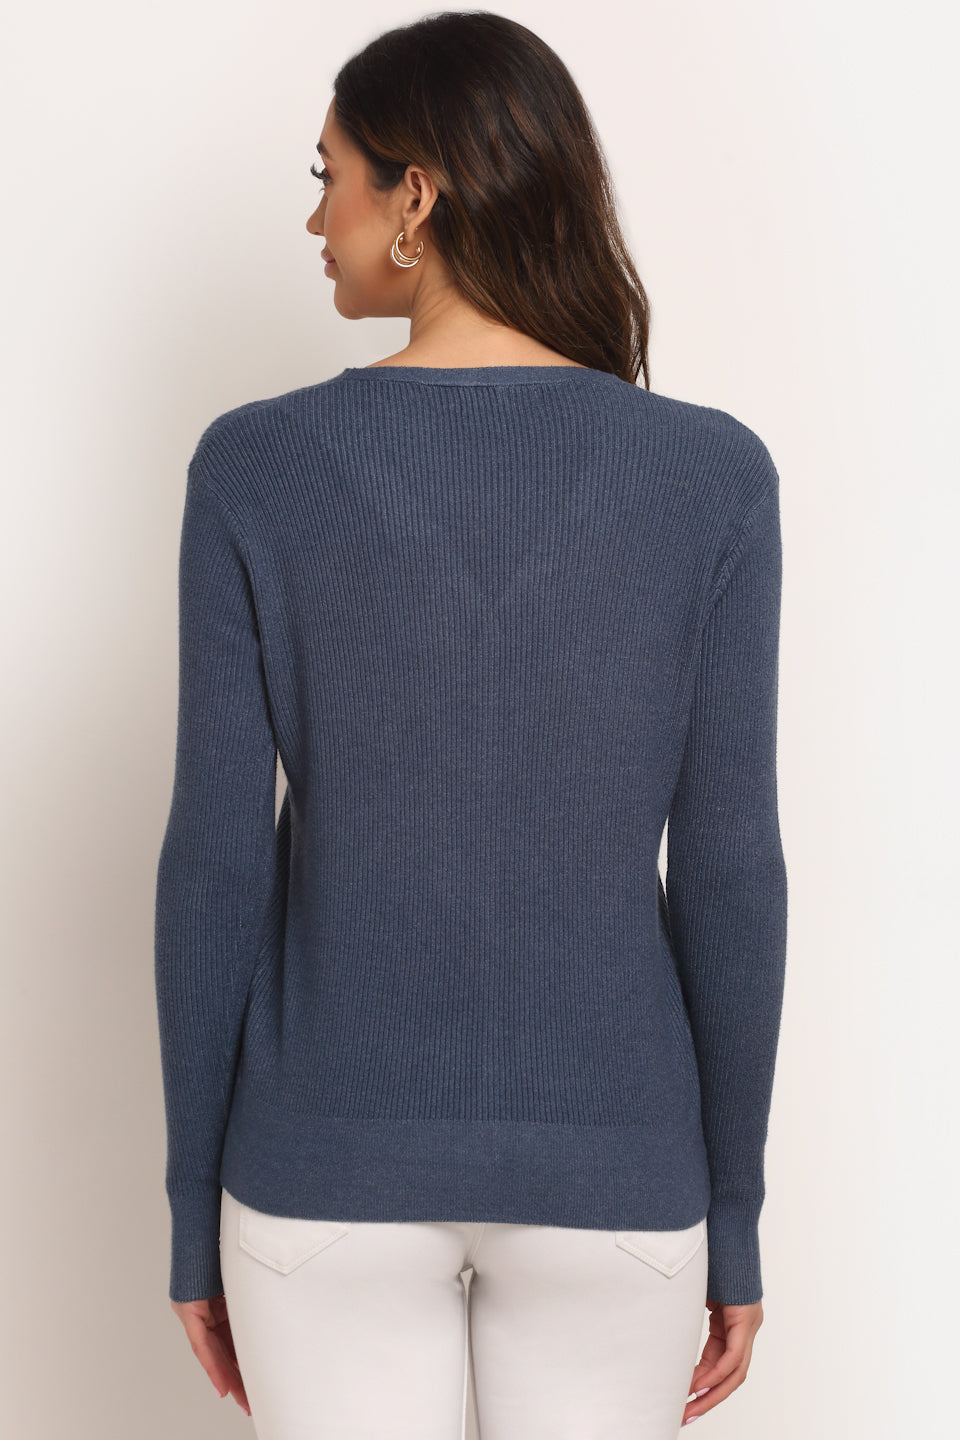  V-Neck KNIT Solid Cardigan With Blue Colour